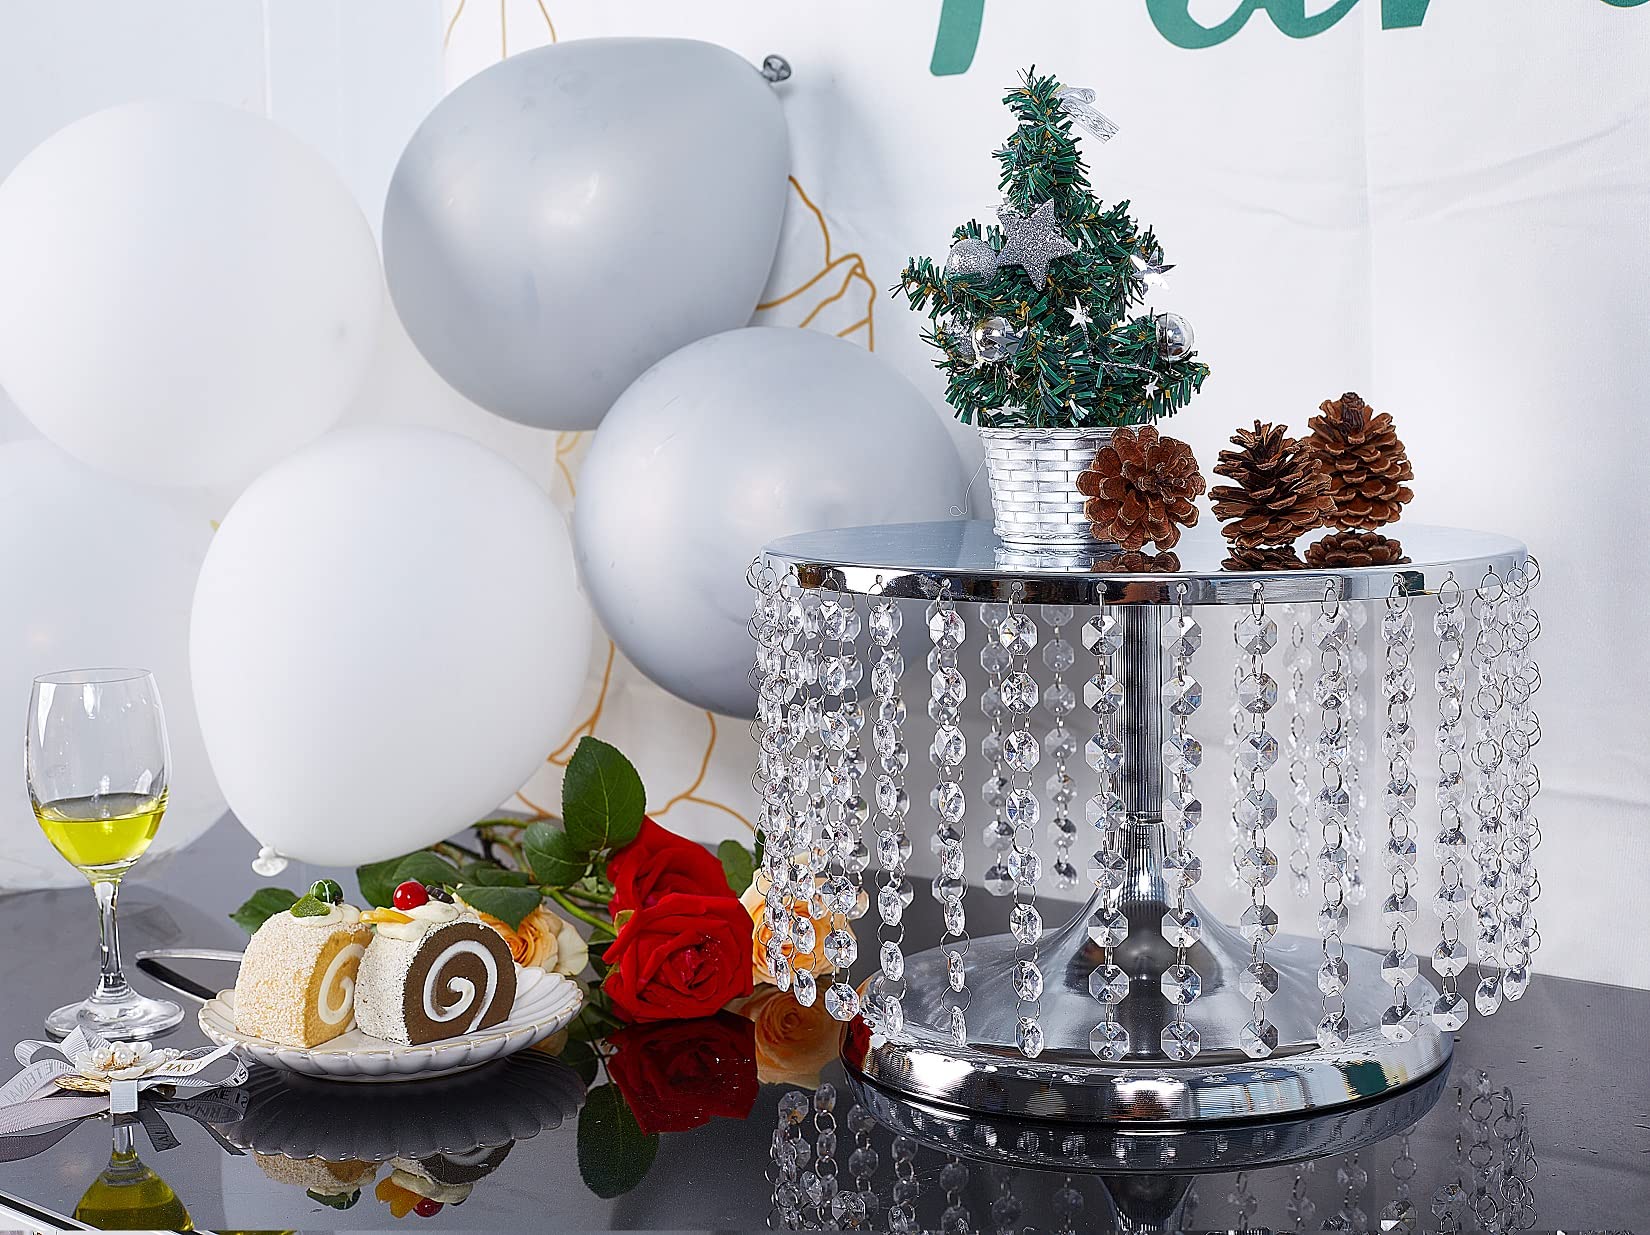 8 Inch Tall Metal Cake Stand - 12" Dia Round Base Cake Display Stand with Hanging Acrylic Crystals for Dessert Table, Wedding, Party, Event, Home Décor